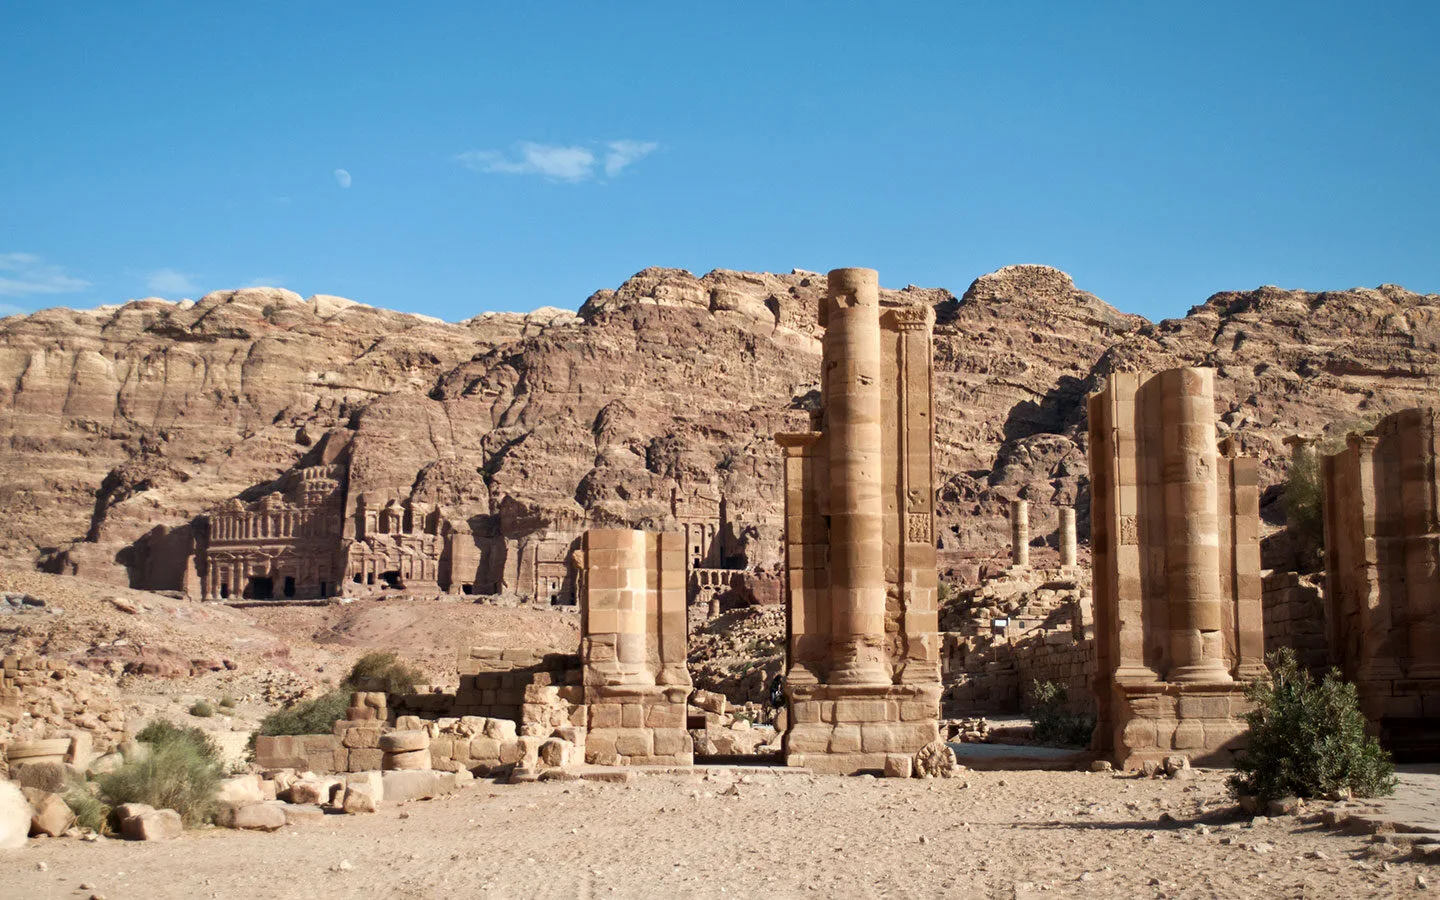 The Colonnaded Street at Petra